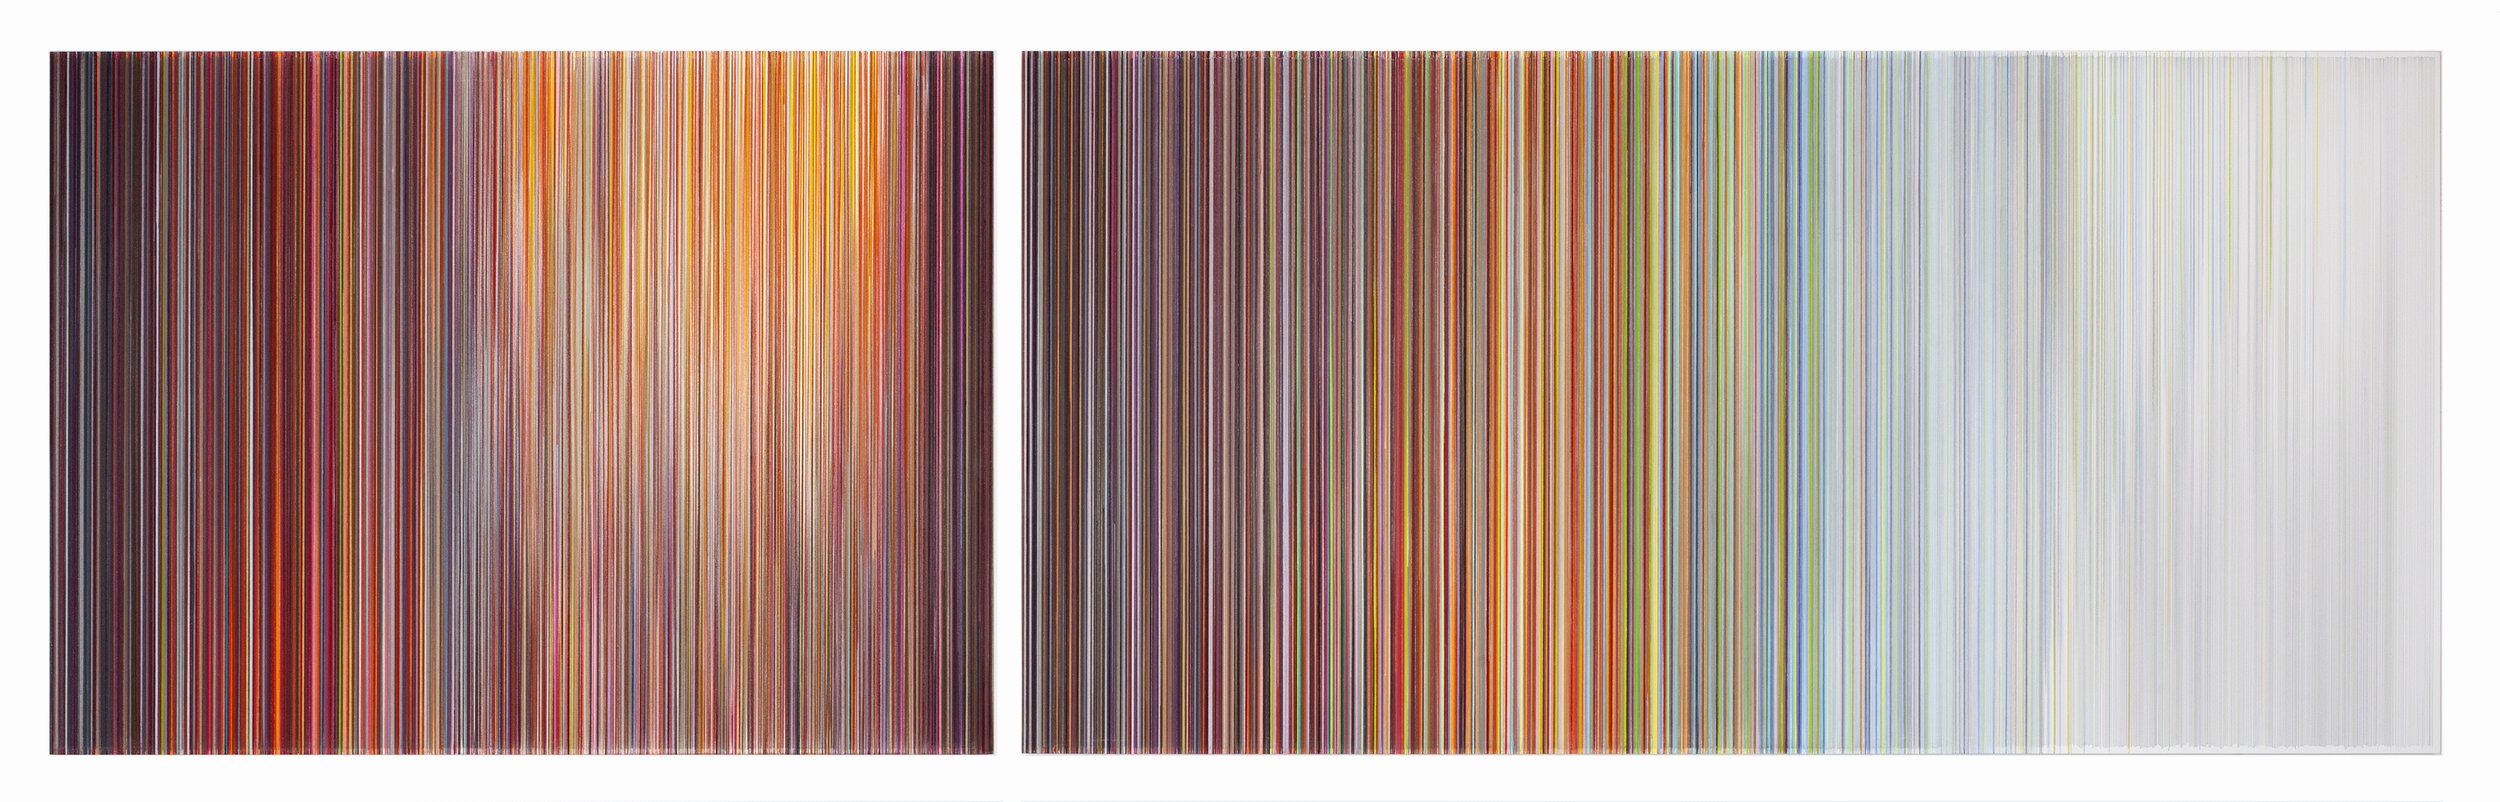    cycles of seeing 02   2020 graphite and colored pencil on mat board 34 by 116 inches in two panels 